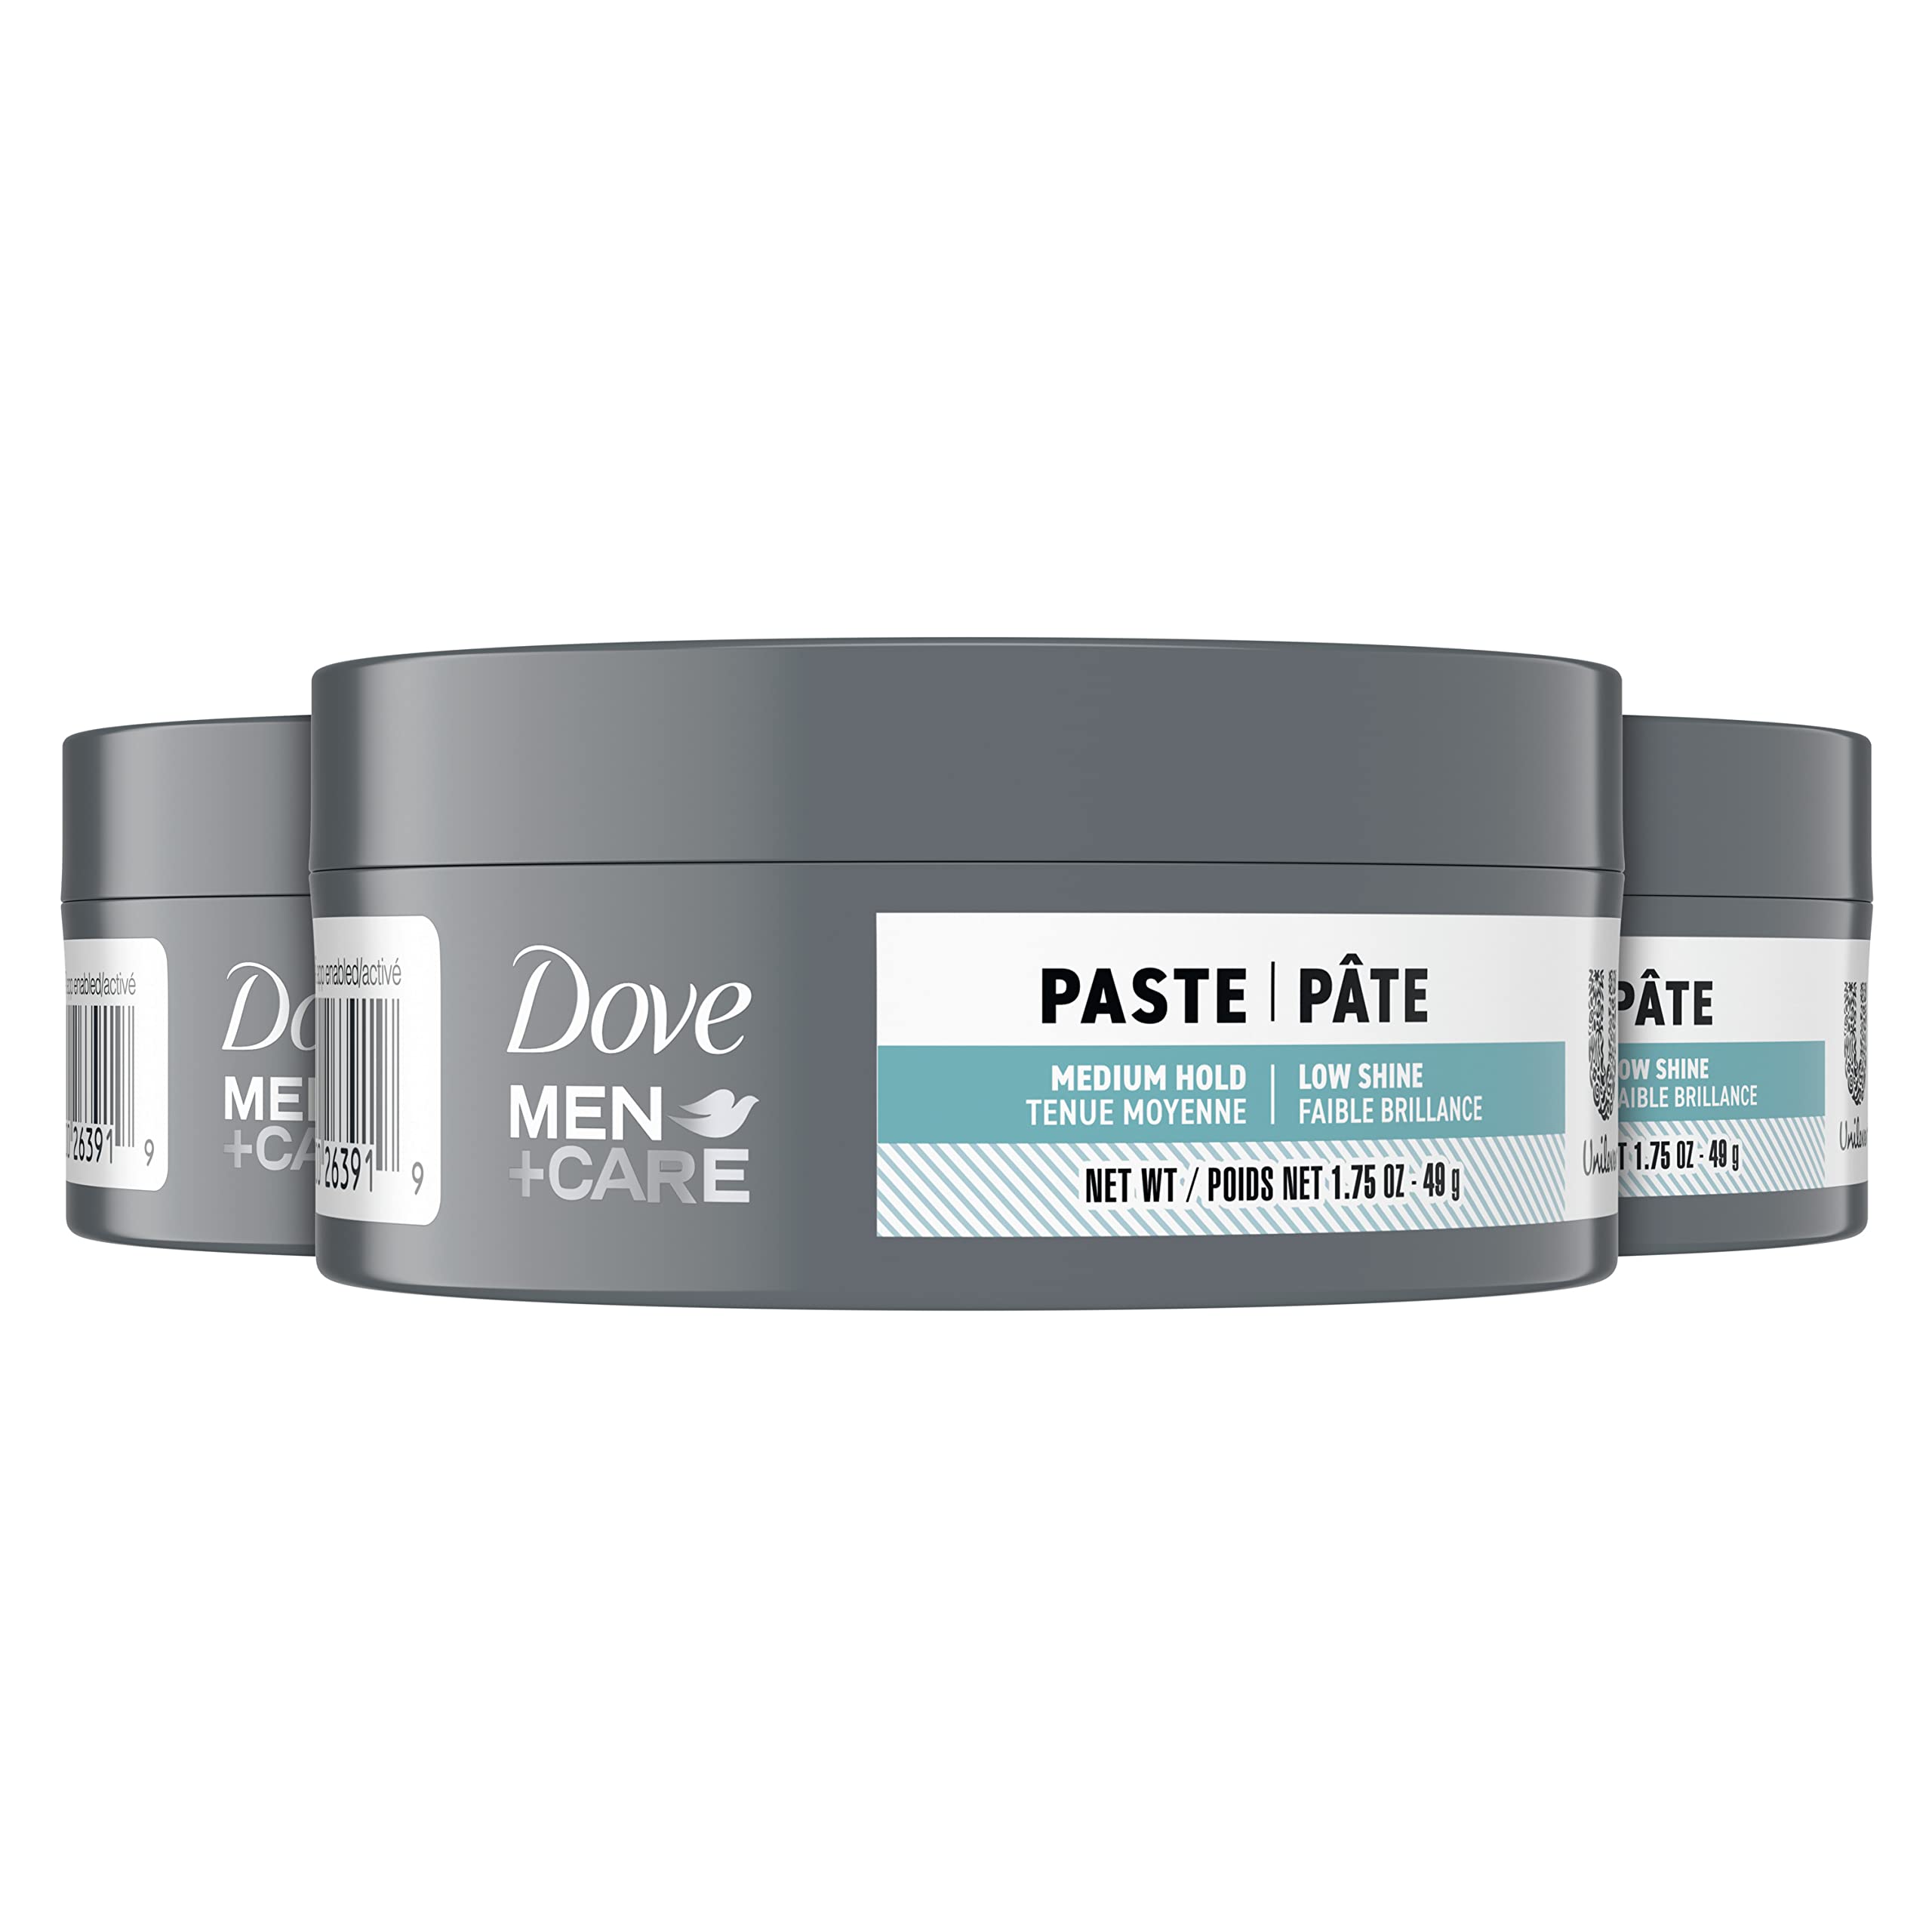 Dove Men+Care Styling Aid Sculpting Hair Paste 3 count Hair Product for a Medium Hold Hair Styling for a Textured Look With A Matte Finish 1.75 oz